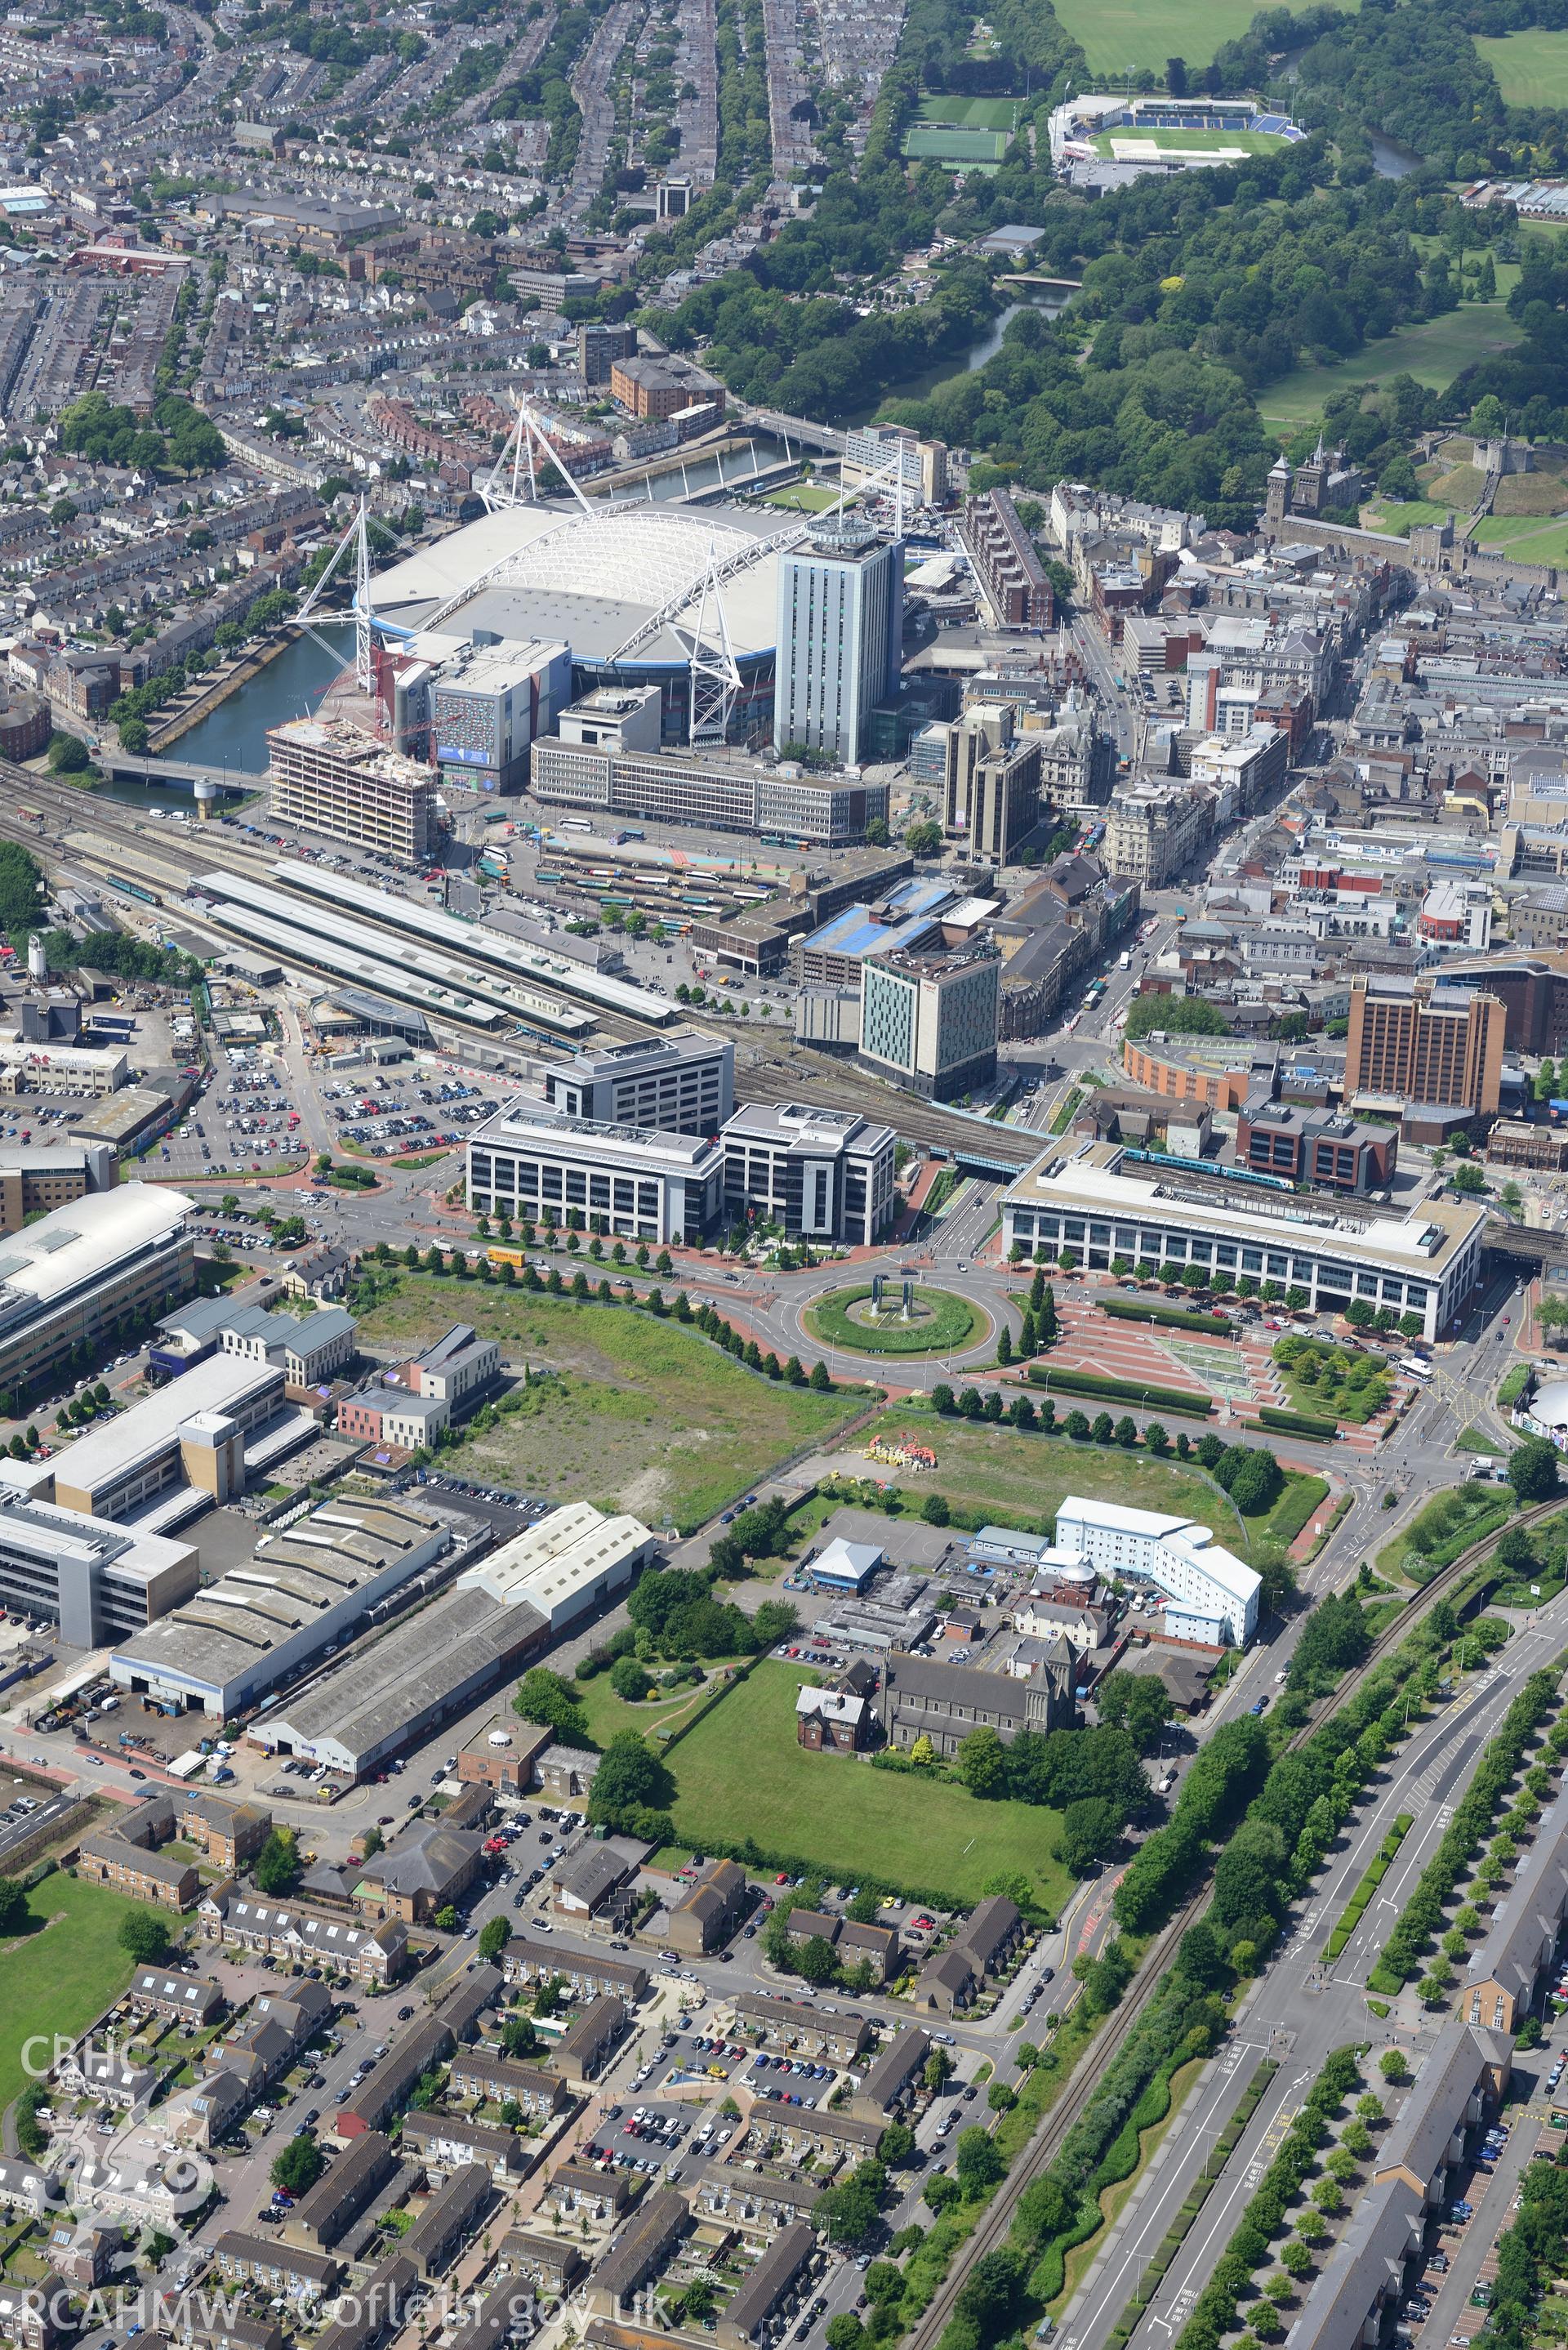 Sophia Garden Cricket Ground, the Millennium Stadium, and Cardiff Central Railway Station, Cardiff. Oblique aerial photograph taken during the Royal Commission's programme of archaeological aerial reconnaissance by Toby Driver on 29th June 2015.